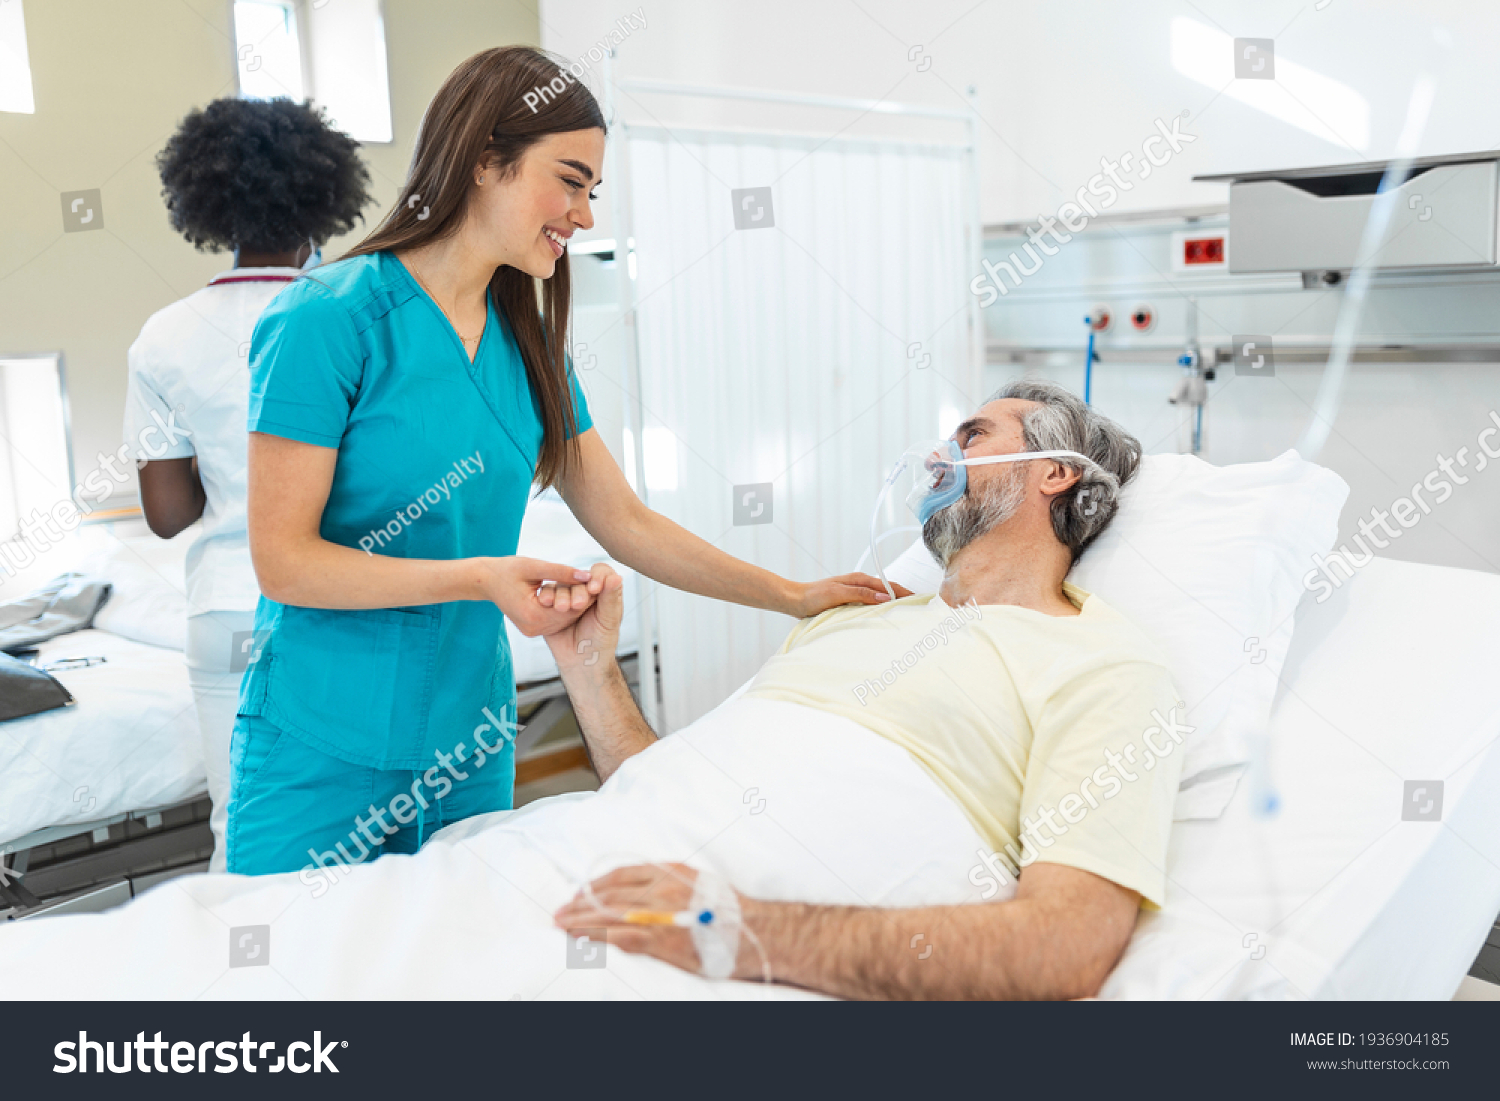 Healthcare concept of professional doctor consulting and comforting elderly patient in hospital bed or counsel diagnosis health. Medical doctor or nurse holding senior patient hands and comforting him #1936904185